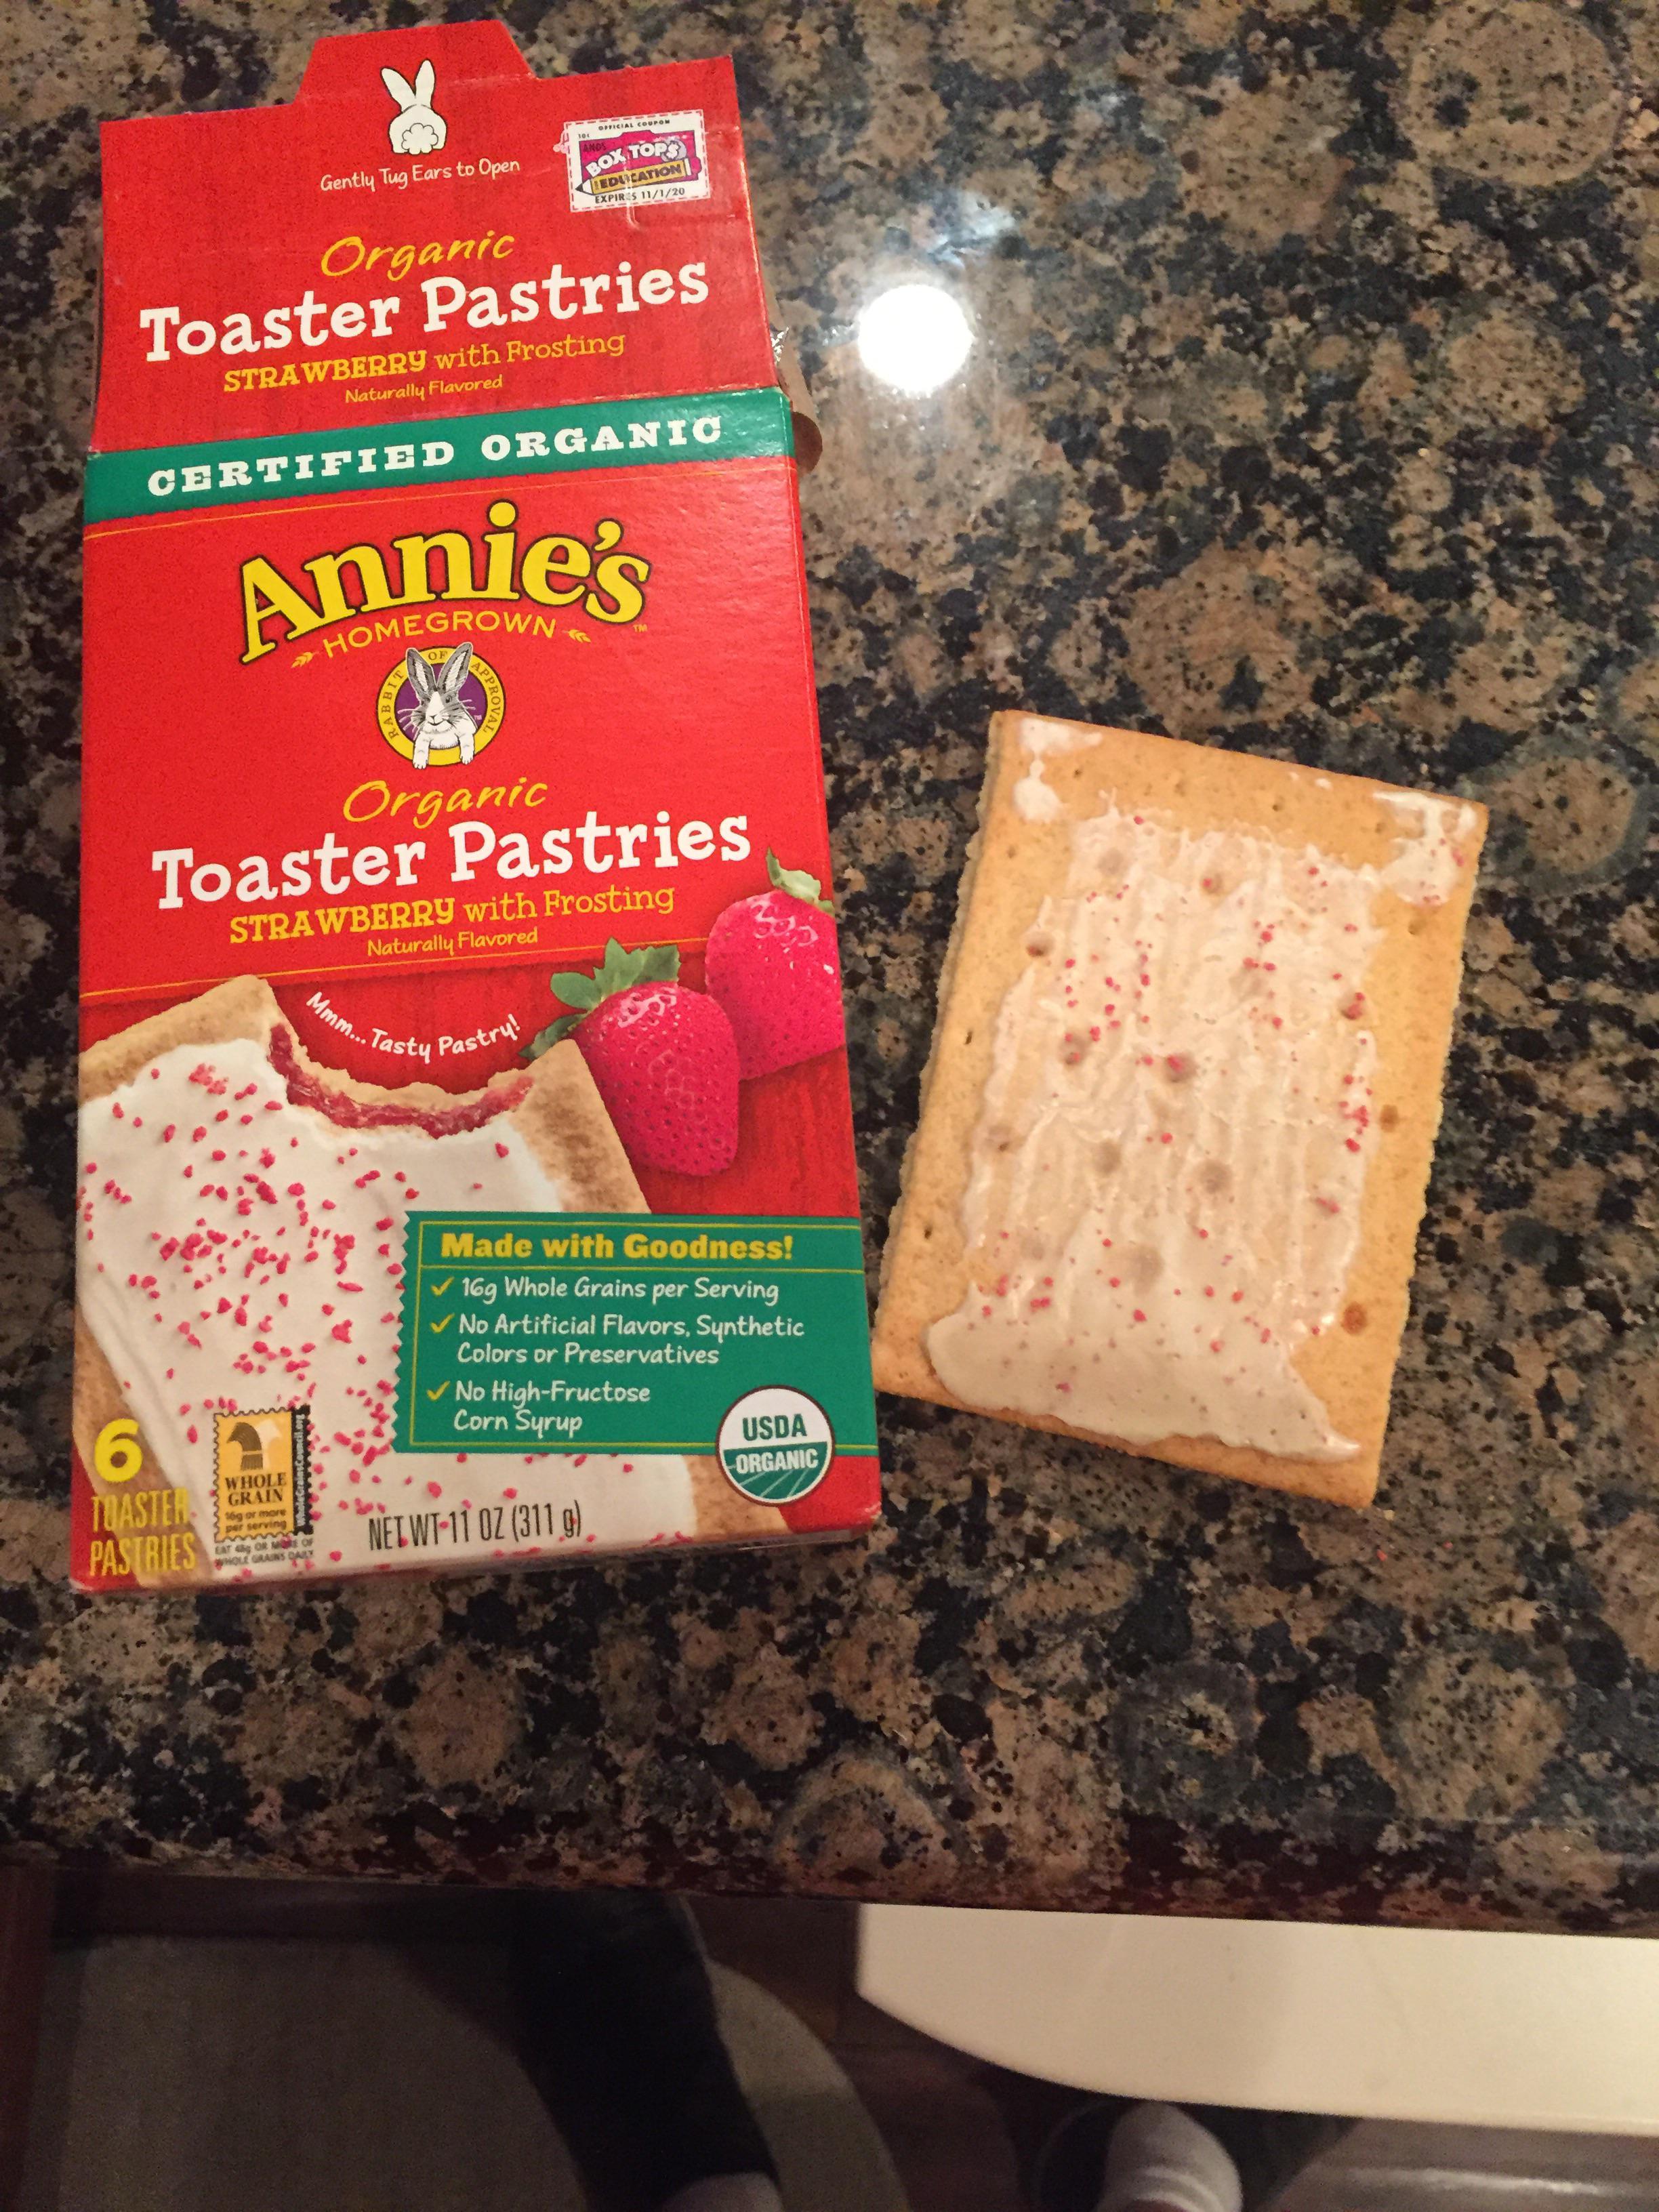 snack - Organic Toaster Pastries Strawberry Certified Organic Annies Organic Toaster Pastries Strawberry with Proting Made with Goodness Mersitel Fevers. She 1101 ,